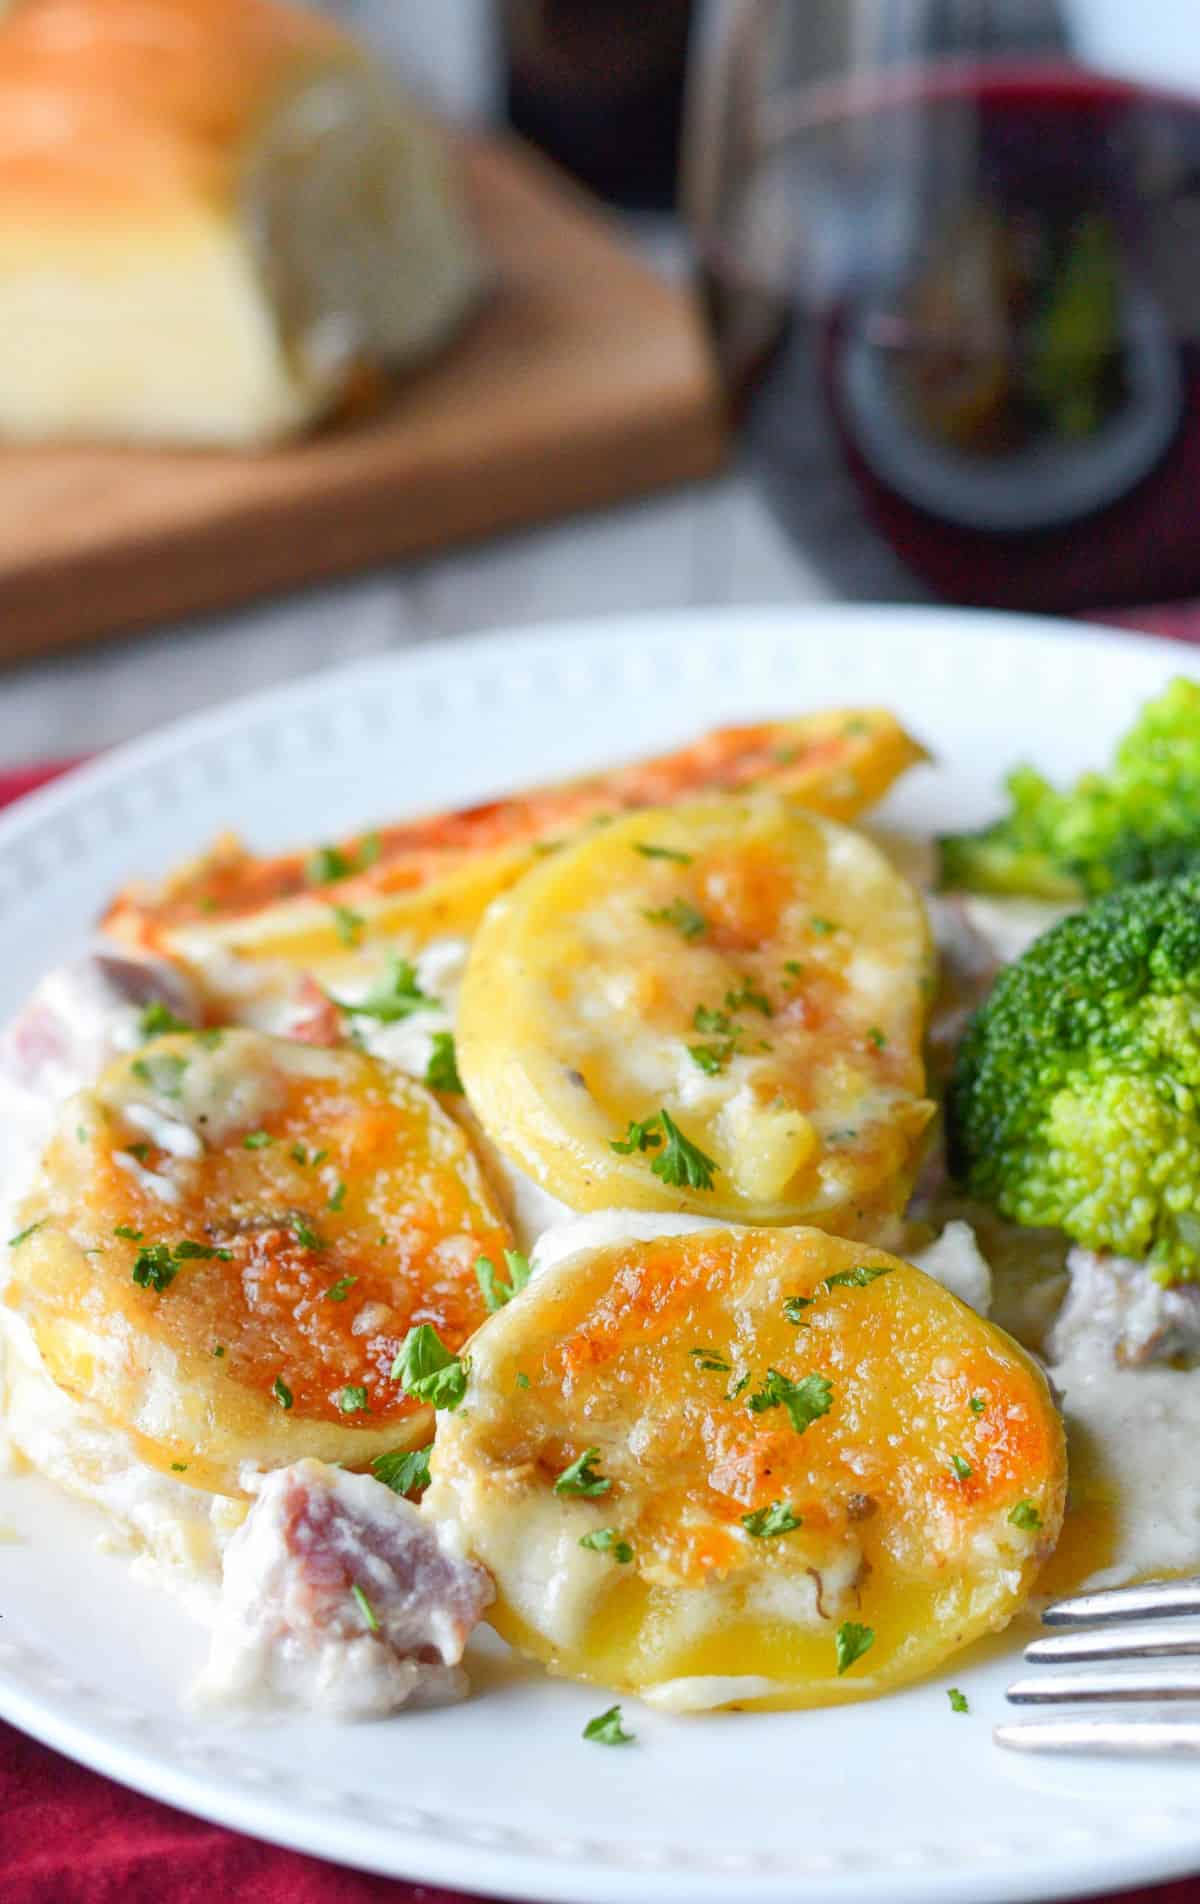 Scalloped potatoes on a plate with broccoli.